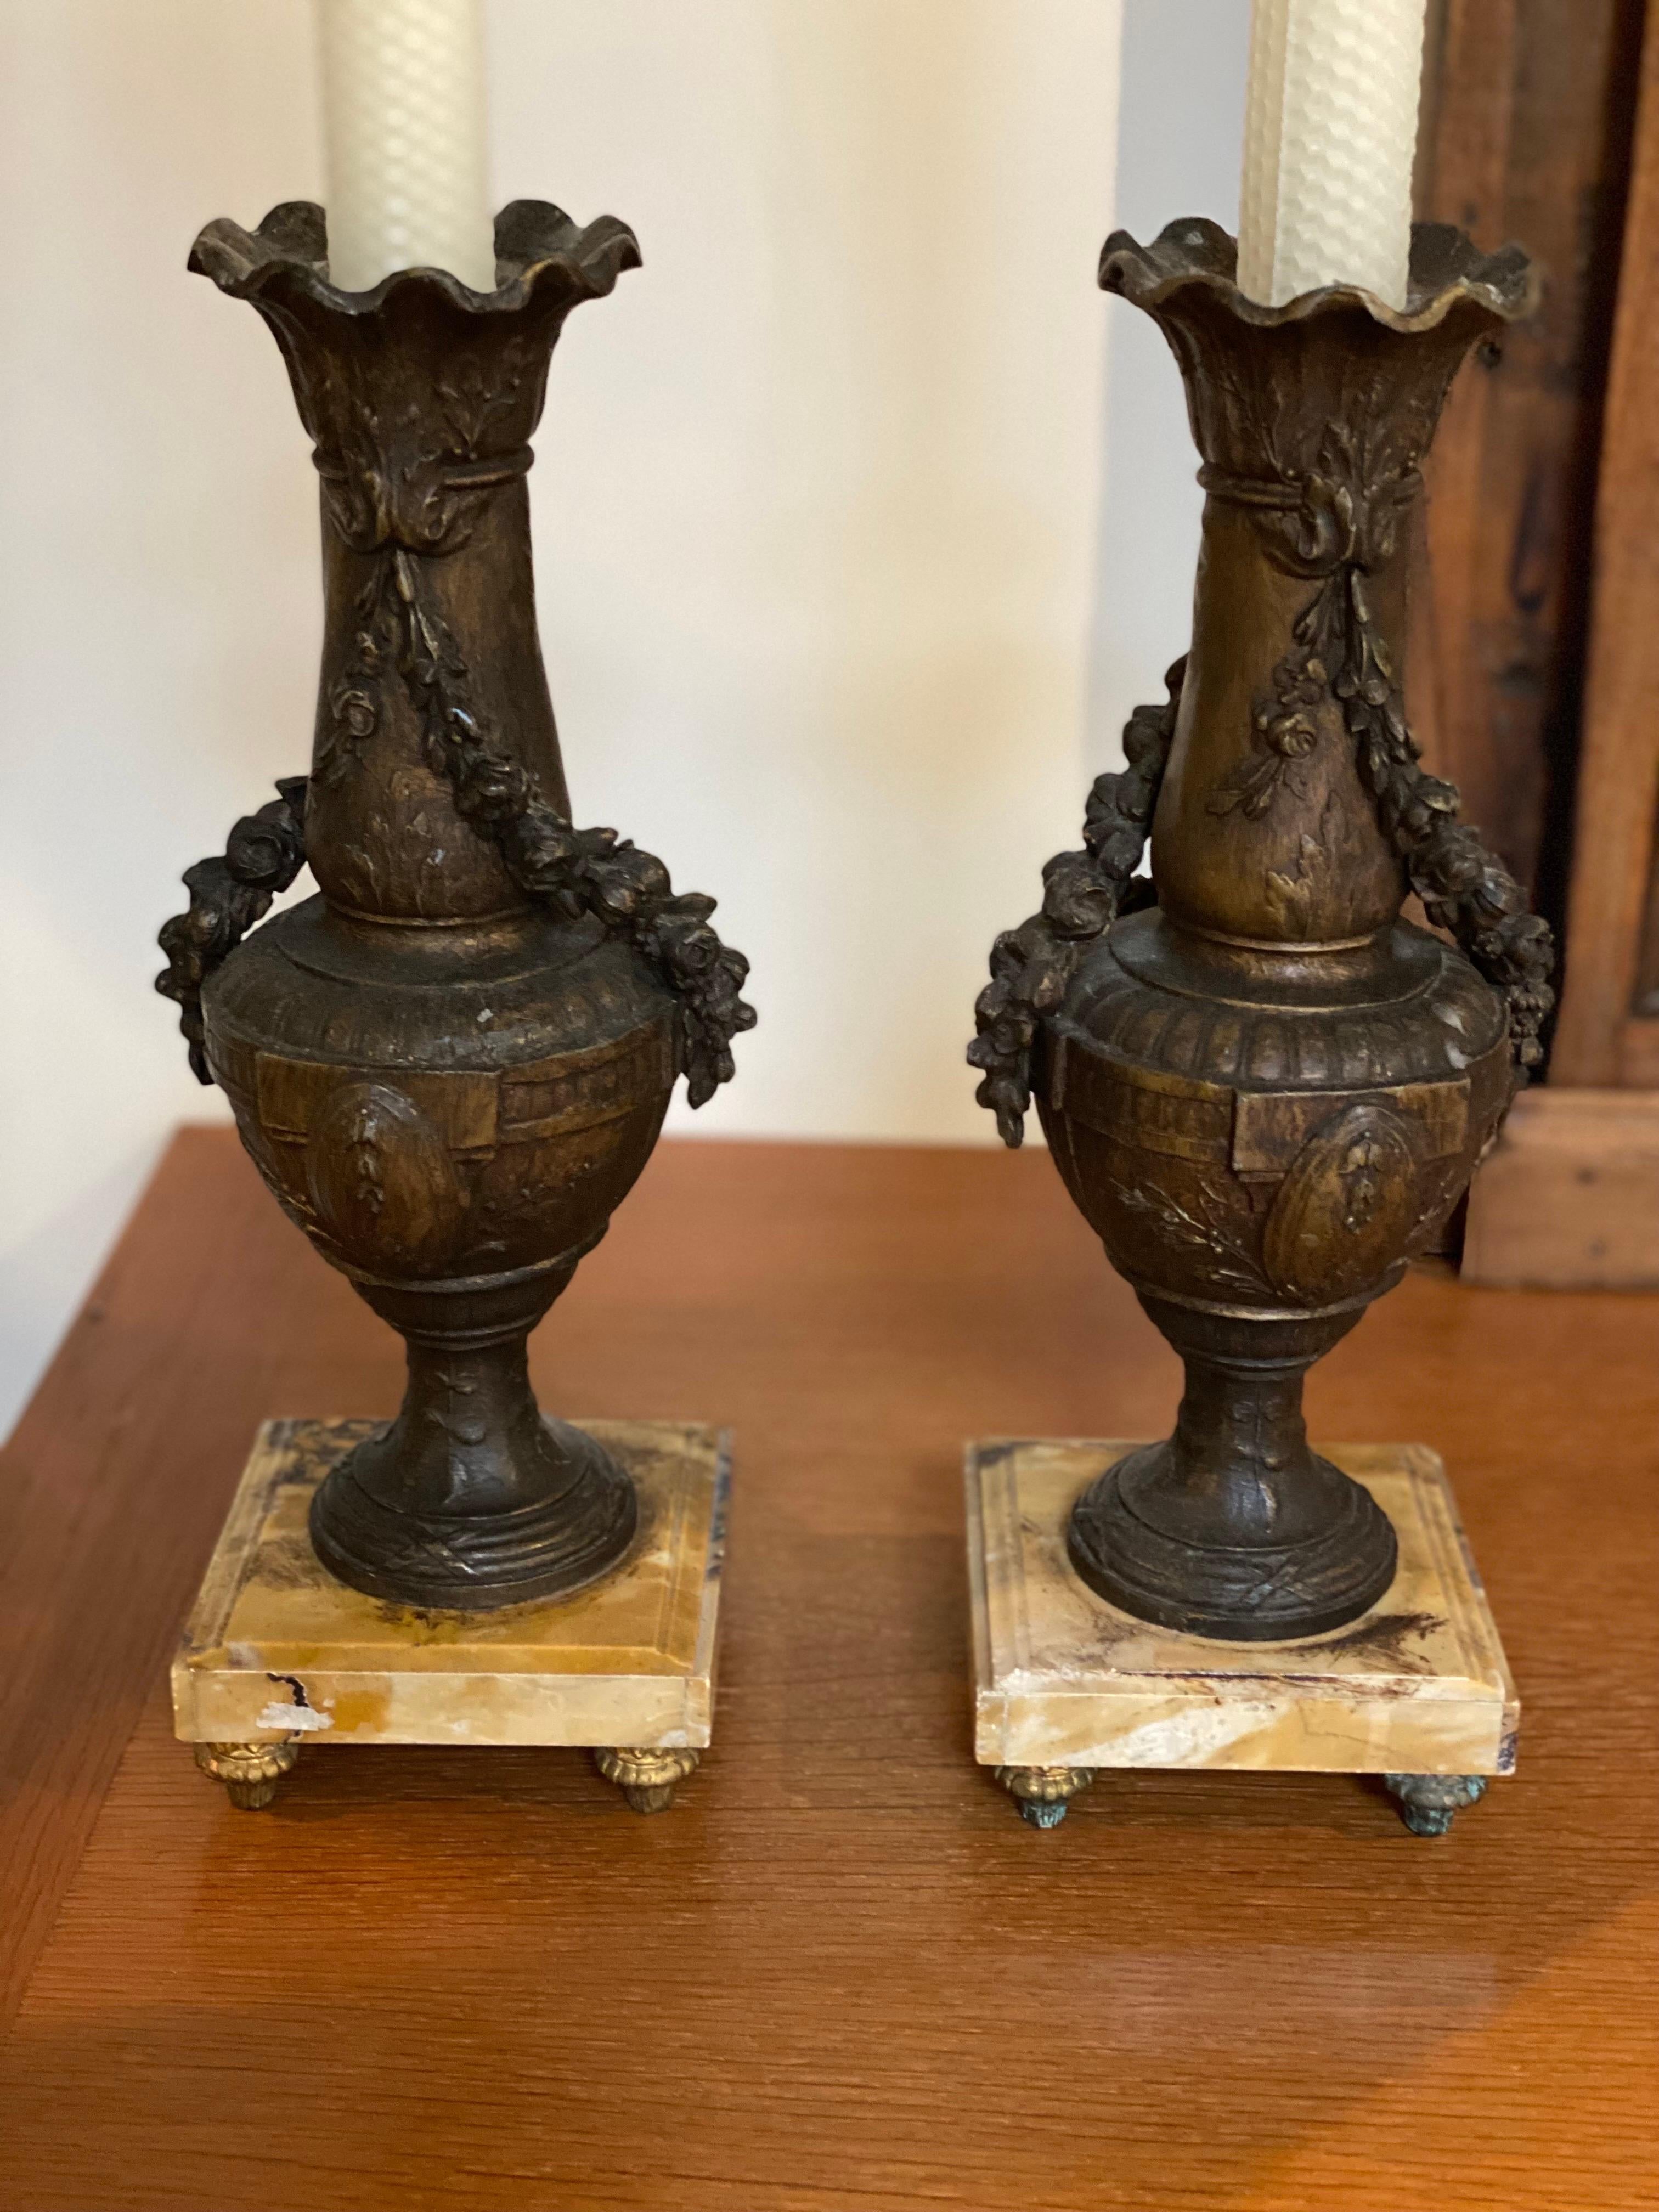 Pair of French neoclassical bronze candlesticks with Marble Base
Beautiful and unusual candlesticks with draped foliage on urn form. Candle opening is larger than normal. General wear, good overall condition.

5